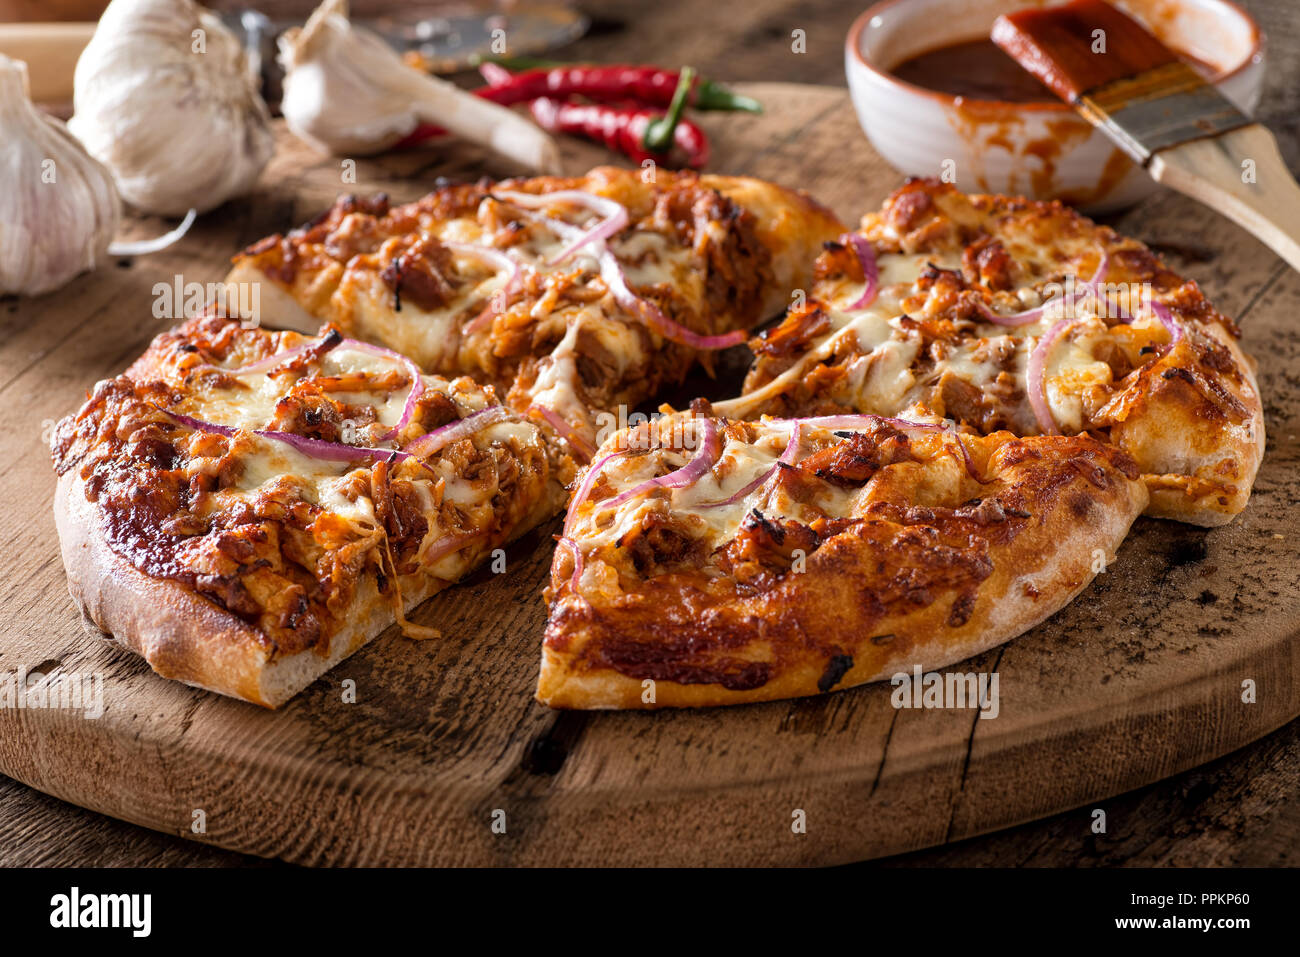 A delicious rustic homemade pizza with bbq pulled pork and red onion. Stock Photo